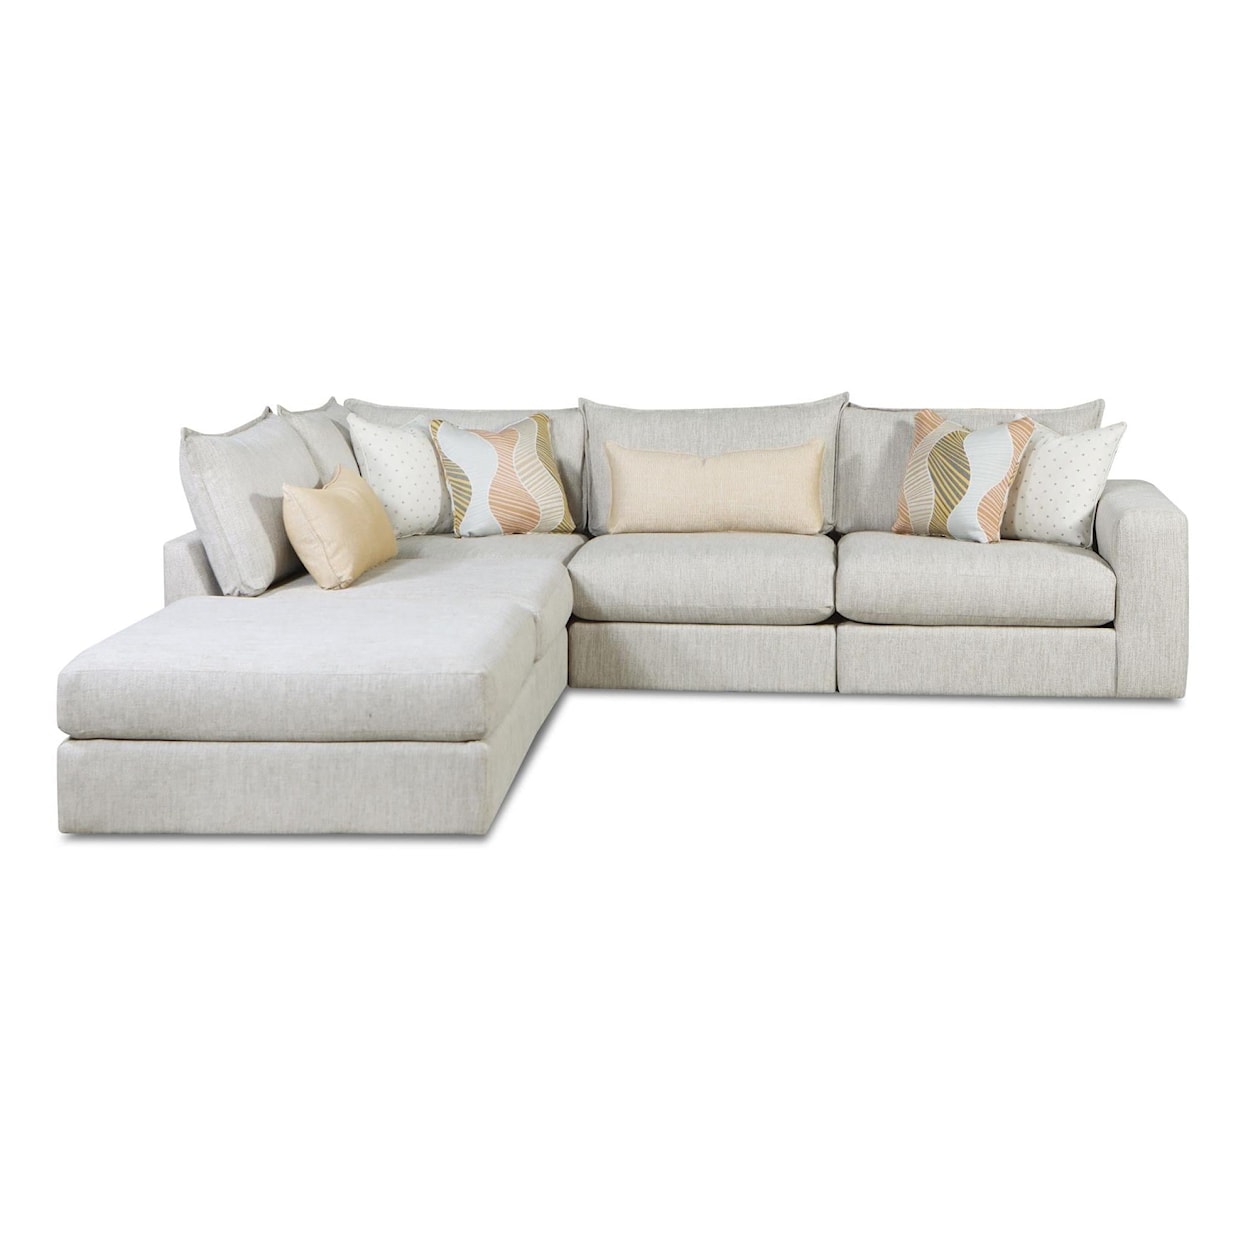 VFM Signature 7004 LOXLEY COCONUT Sectional